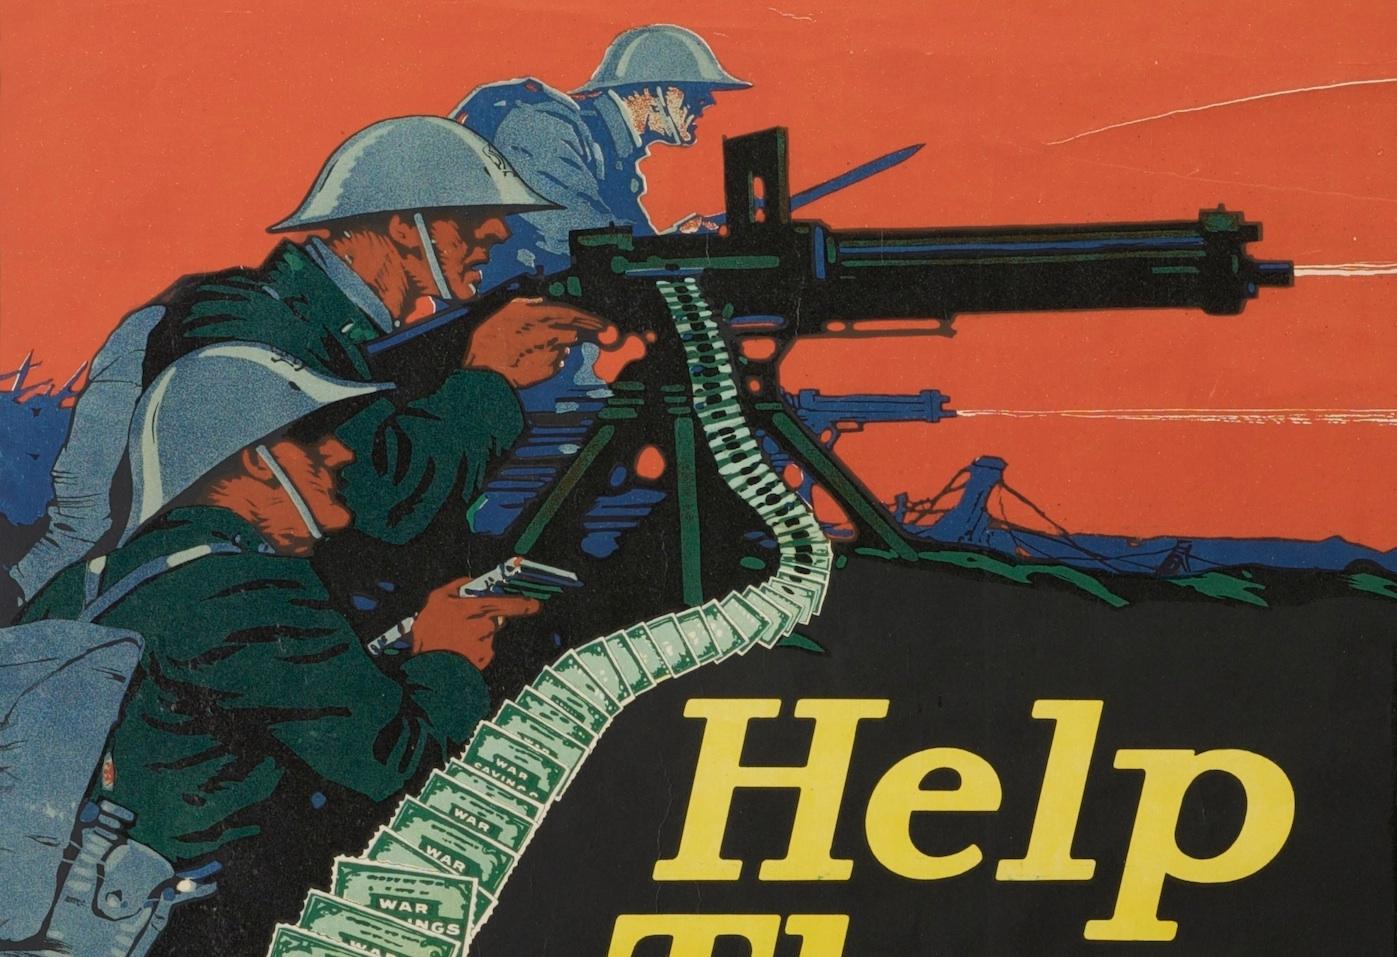 WWI Poster, 